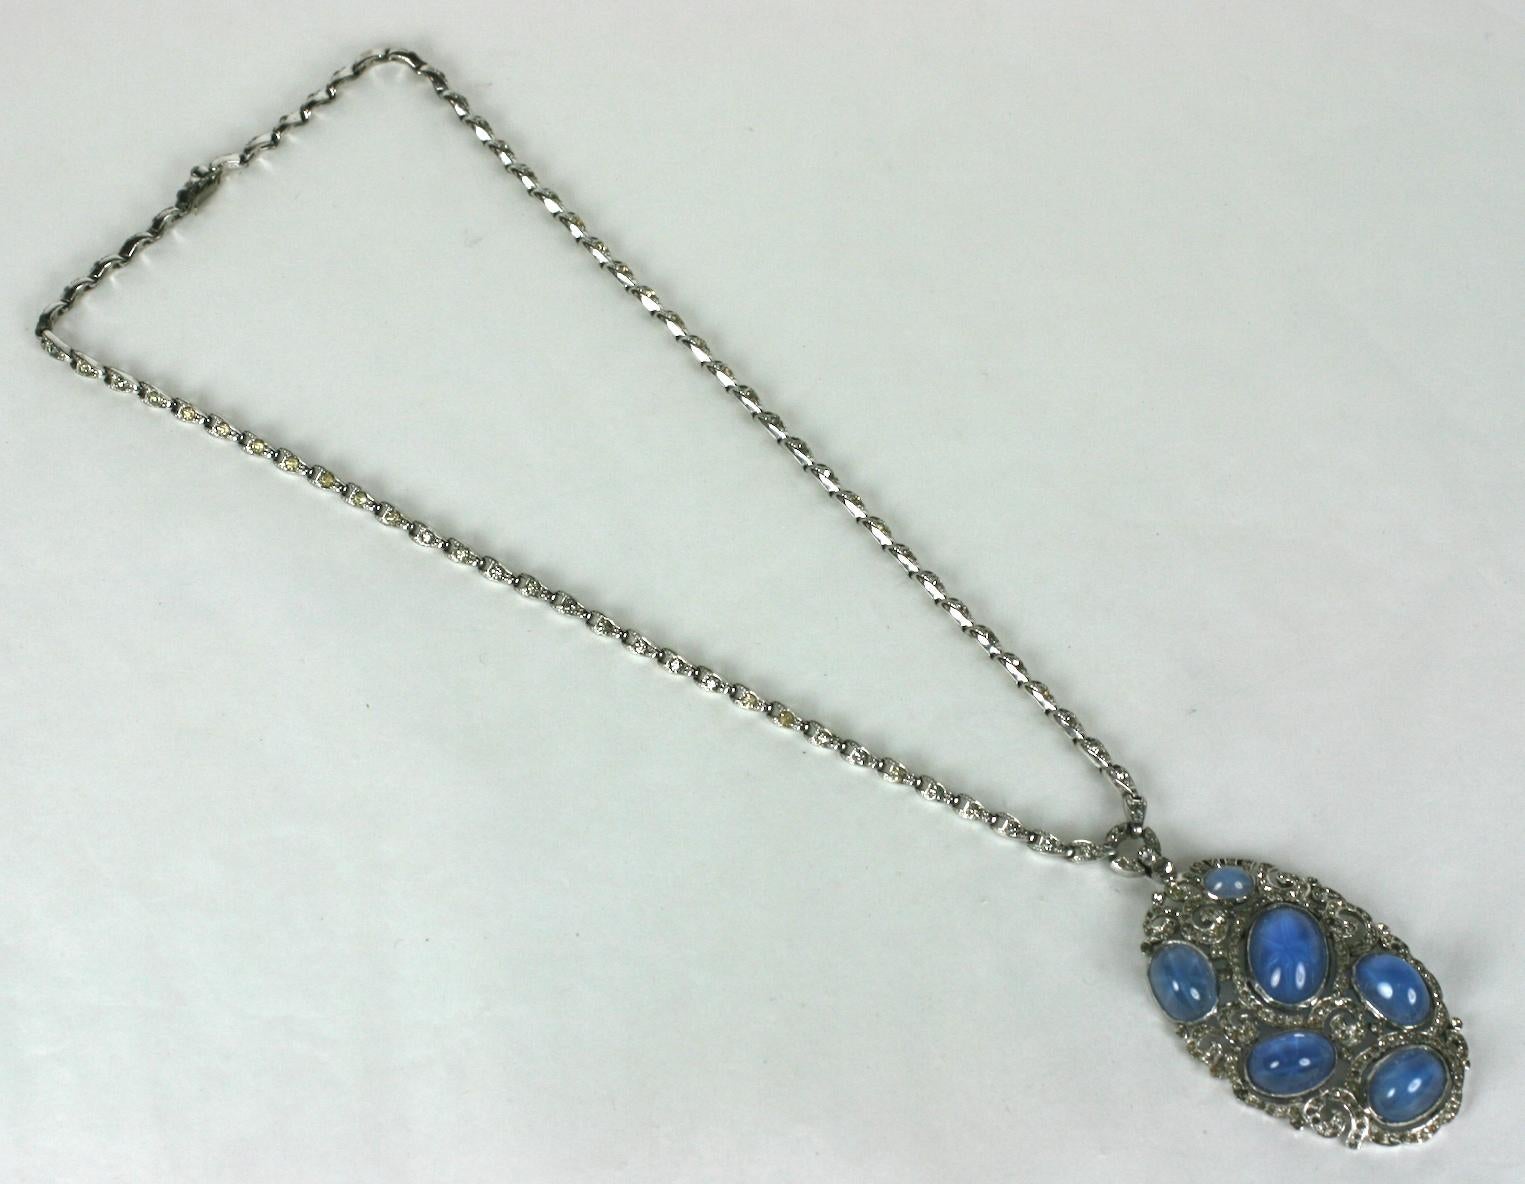 Rare, early Edwardian Style Early TFK Trifari Art Deco Necklace Star Sapphire glass cabochons. Pave links suspend an oval drop set with six faux star sapphires and pierced pave work.Rhodium plate base metal, set with  crystal   rhinestones
Signed